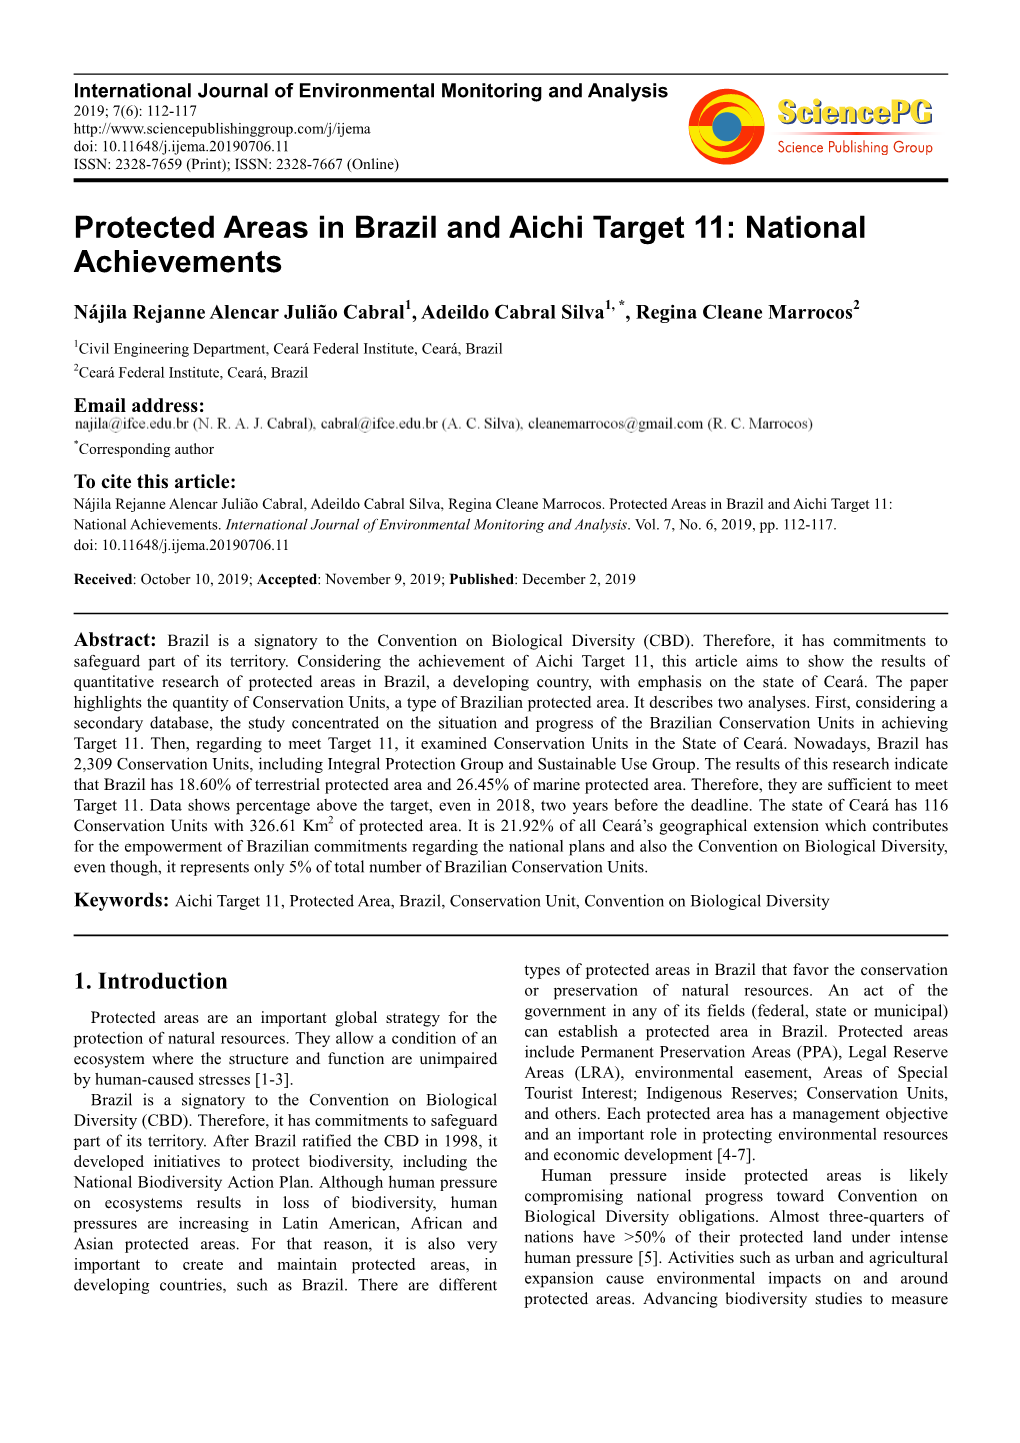 Protected Areas in Brazil and Aichi Target 11: National Achievements